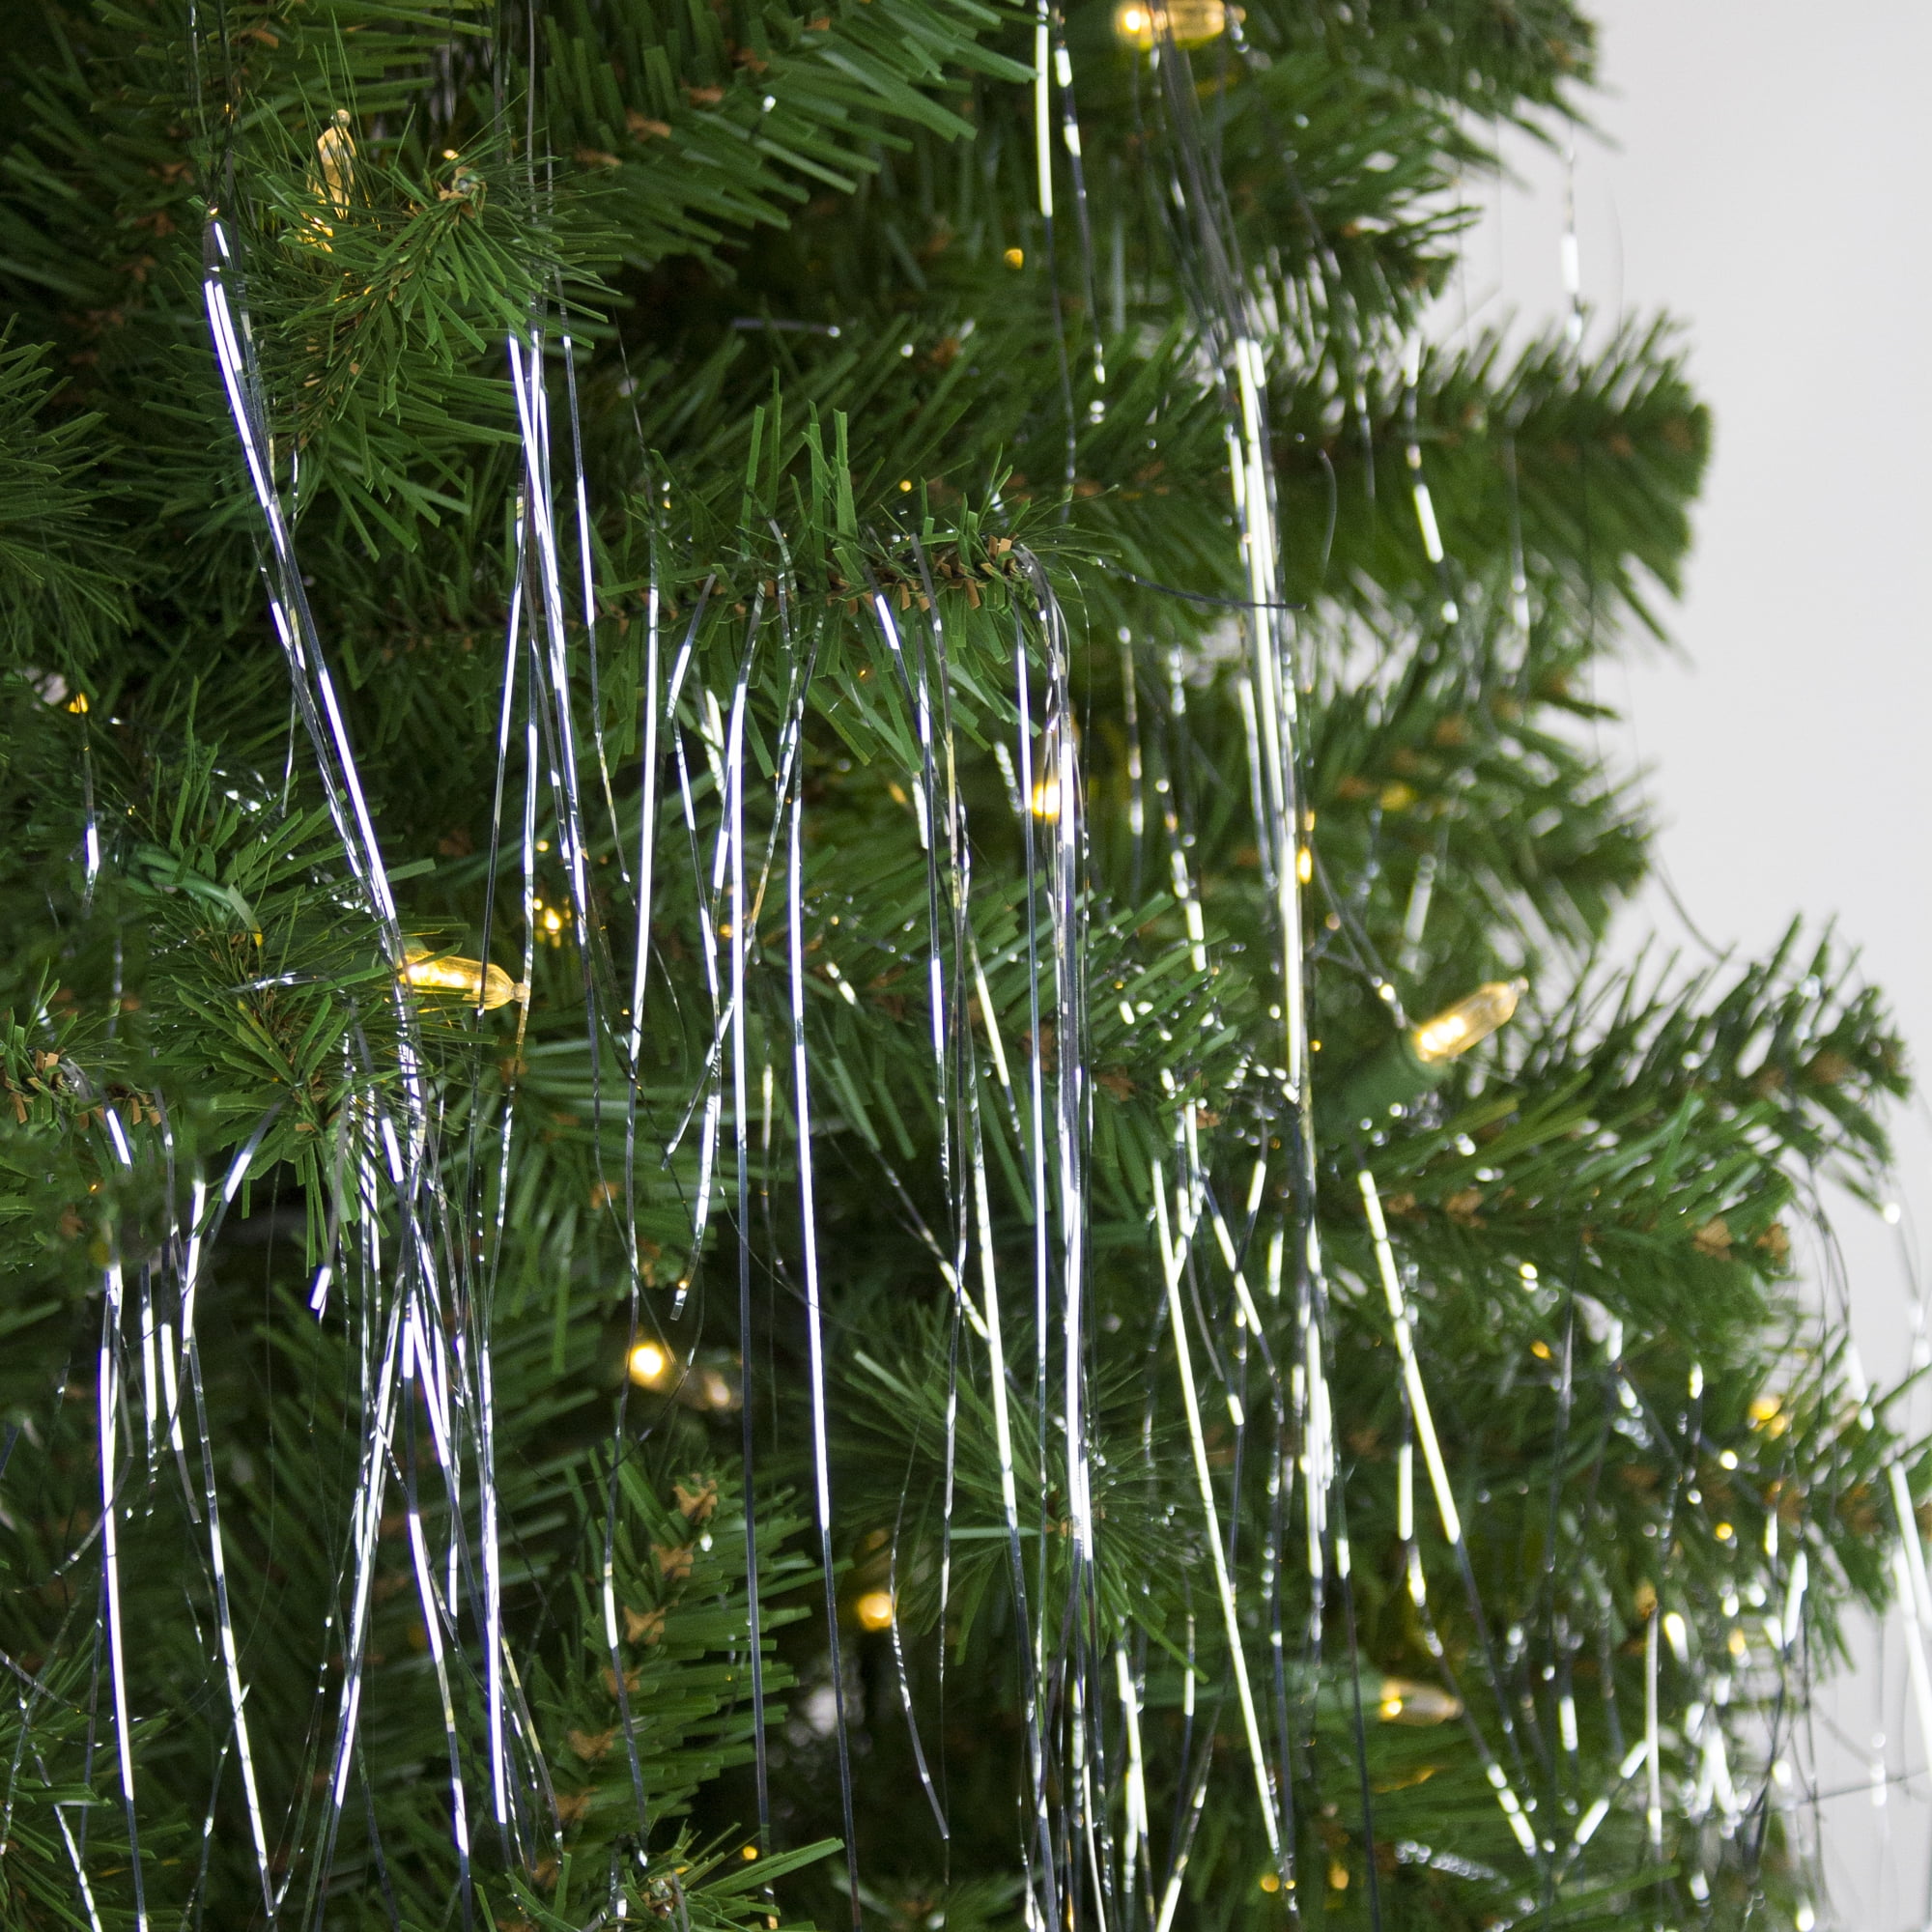 Brite Star Silver 18 Inches Long Icicles Tinsel 1000 Strands Each for sale online